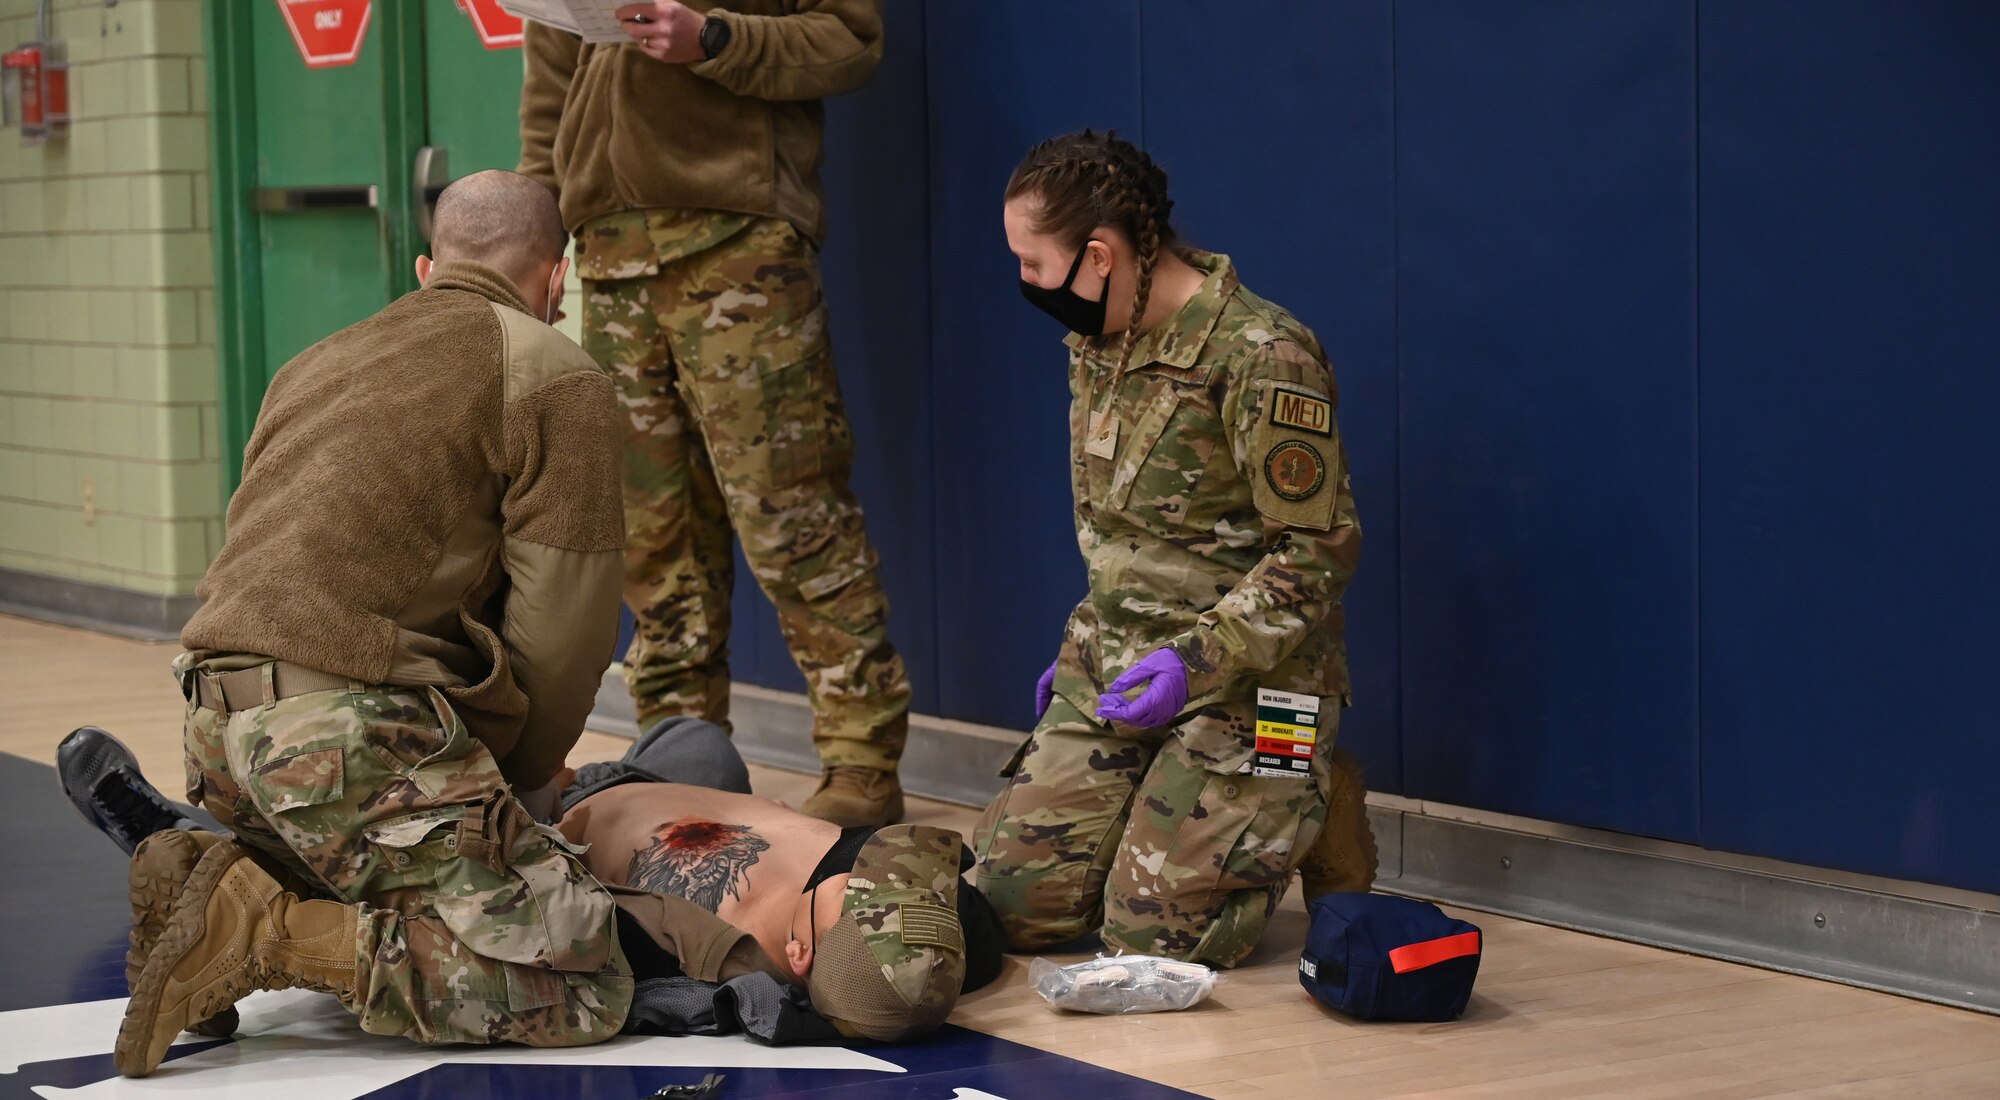 Medics performs triage to role player casualty